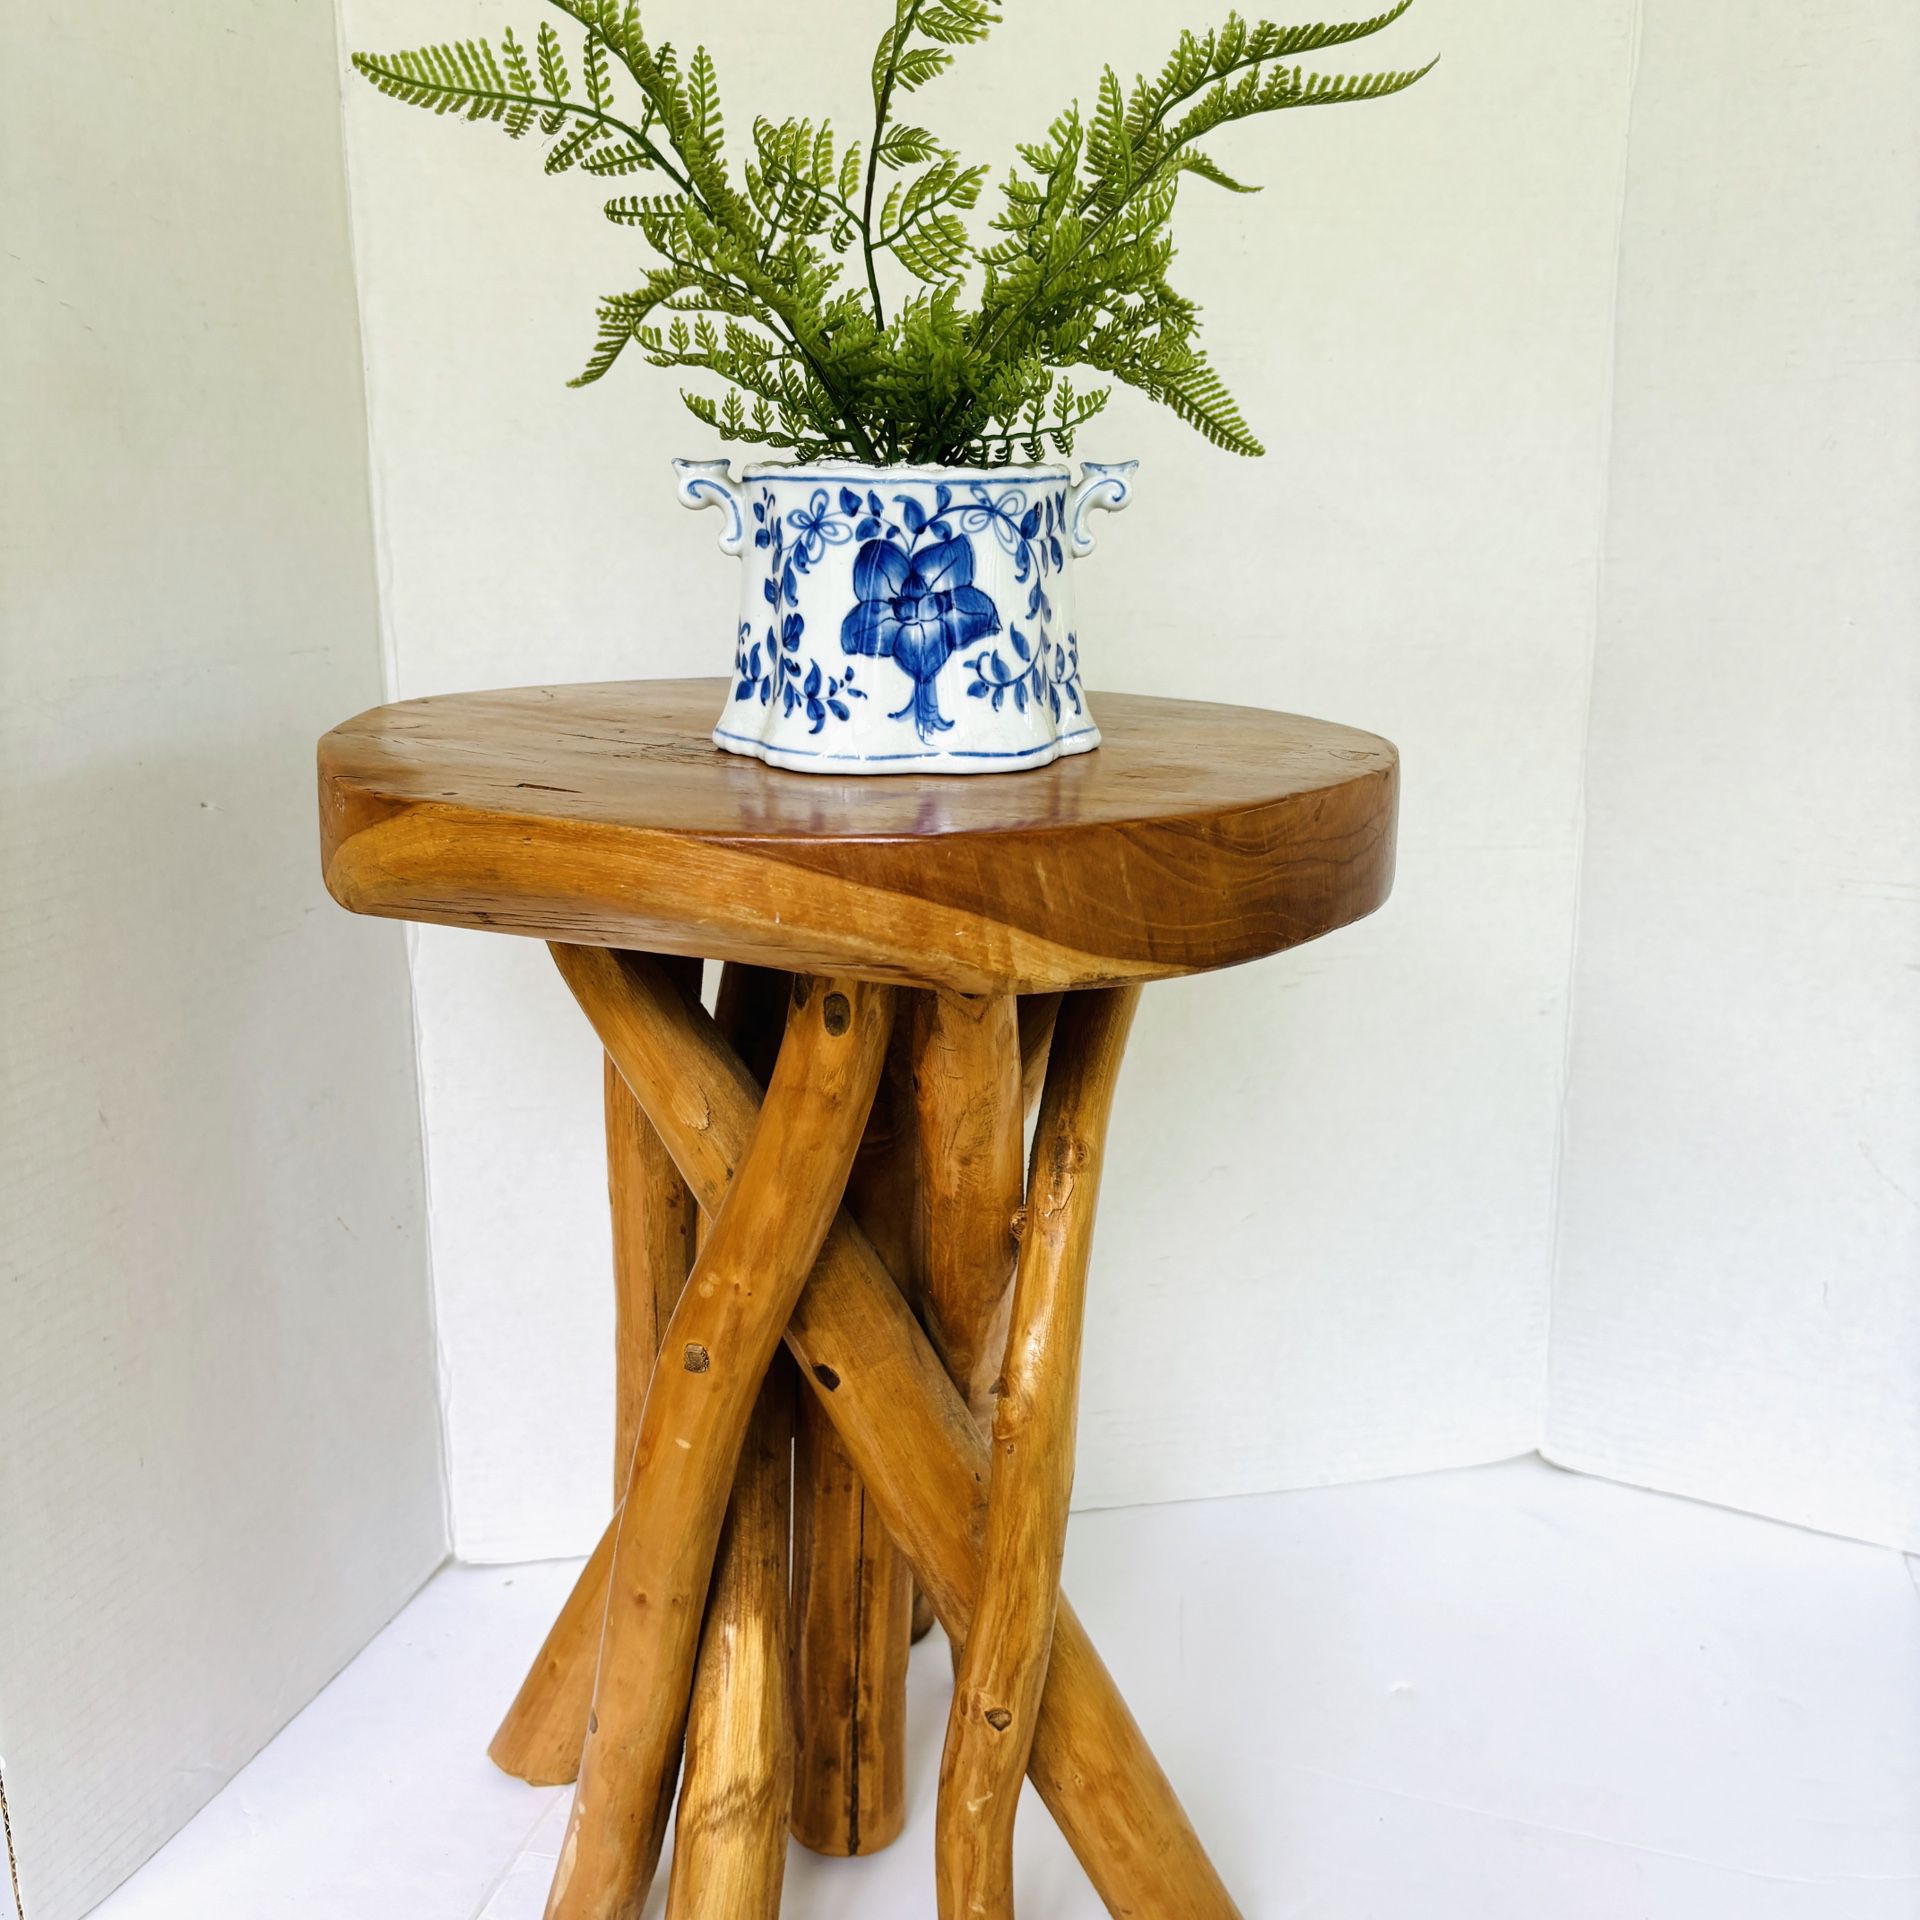 Teak Stool/Plant Stand/Table Wooden Root Legs Live Edge